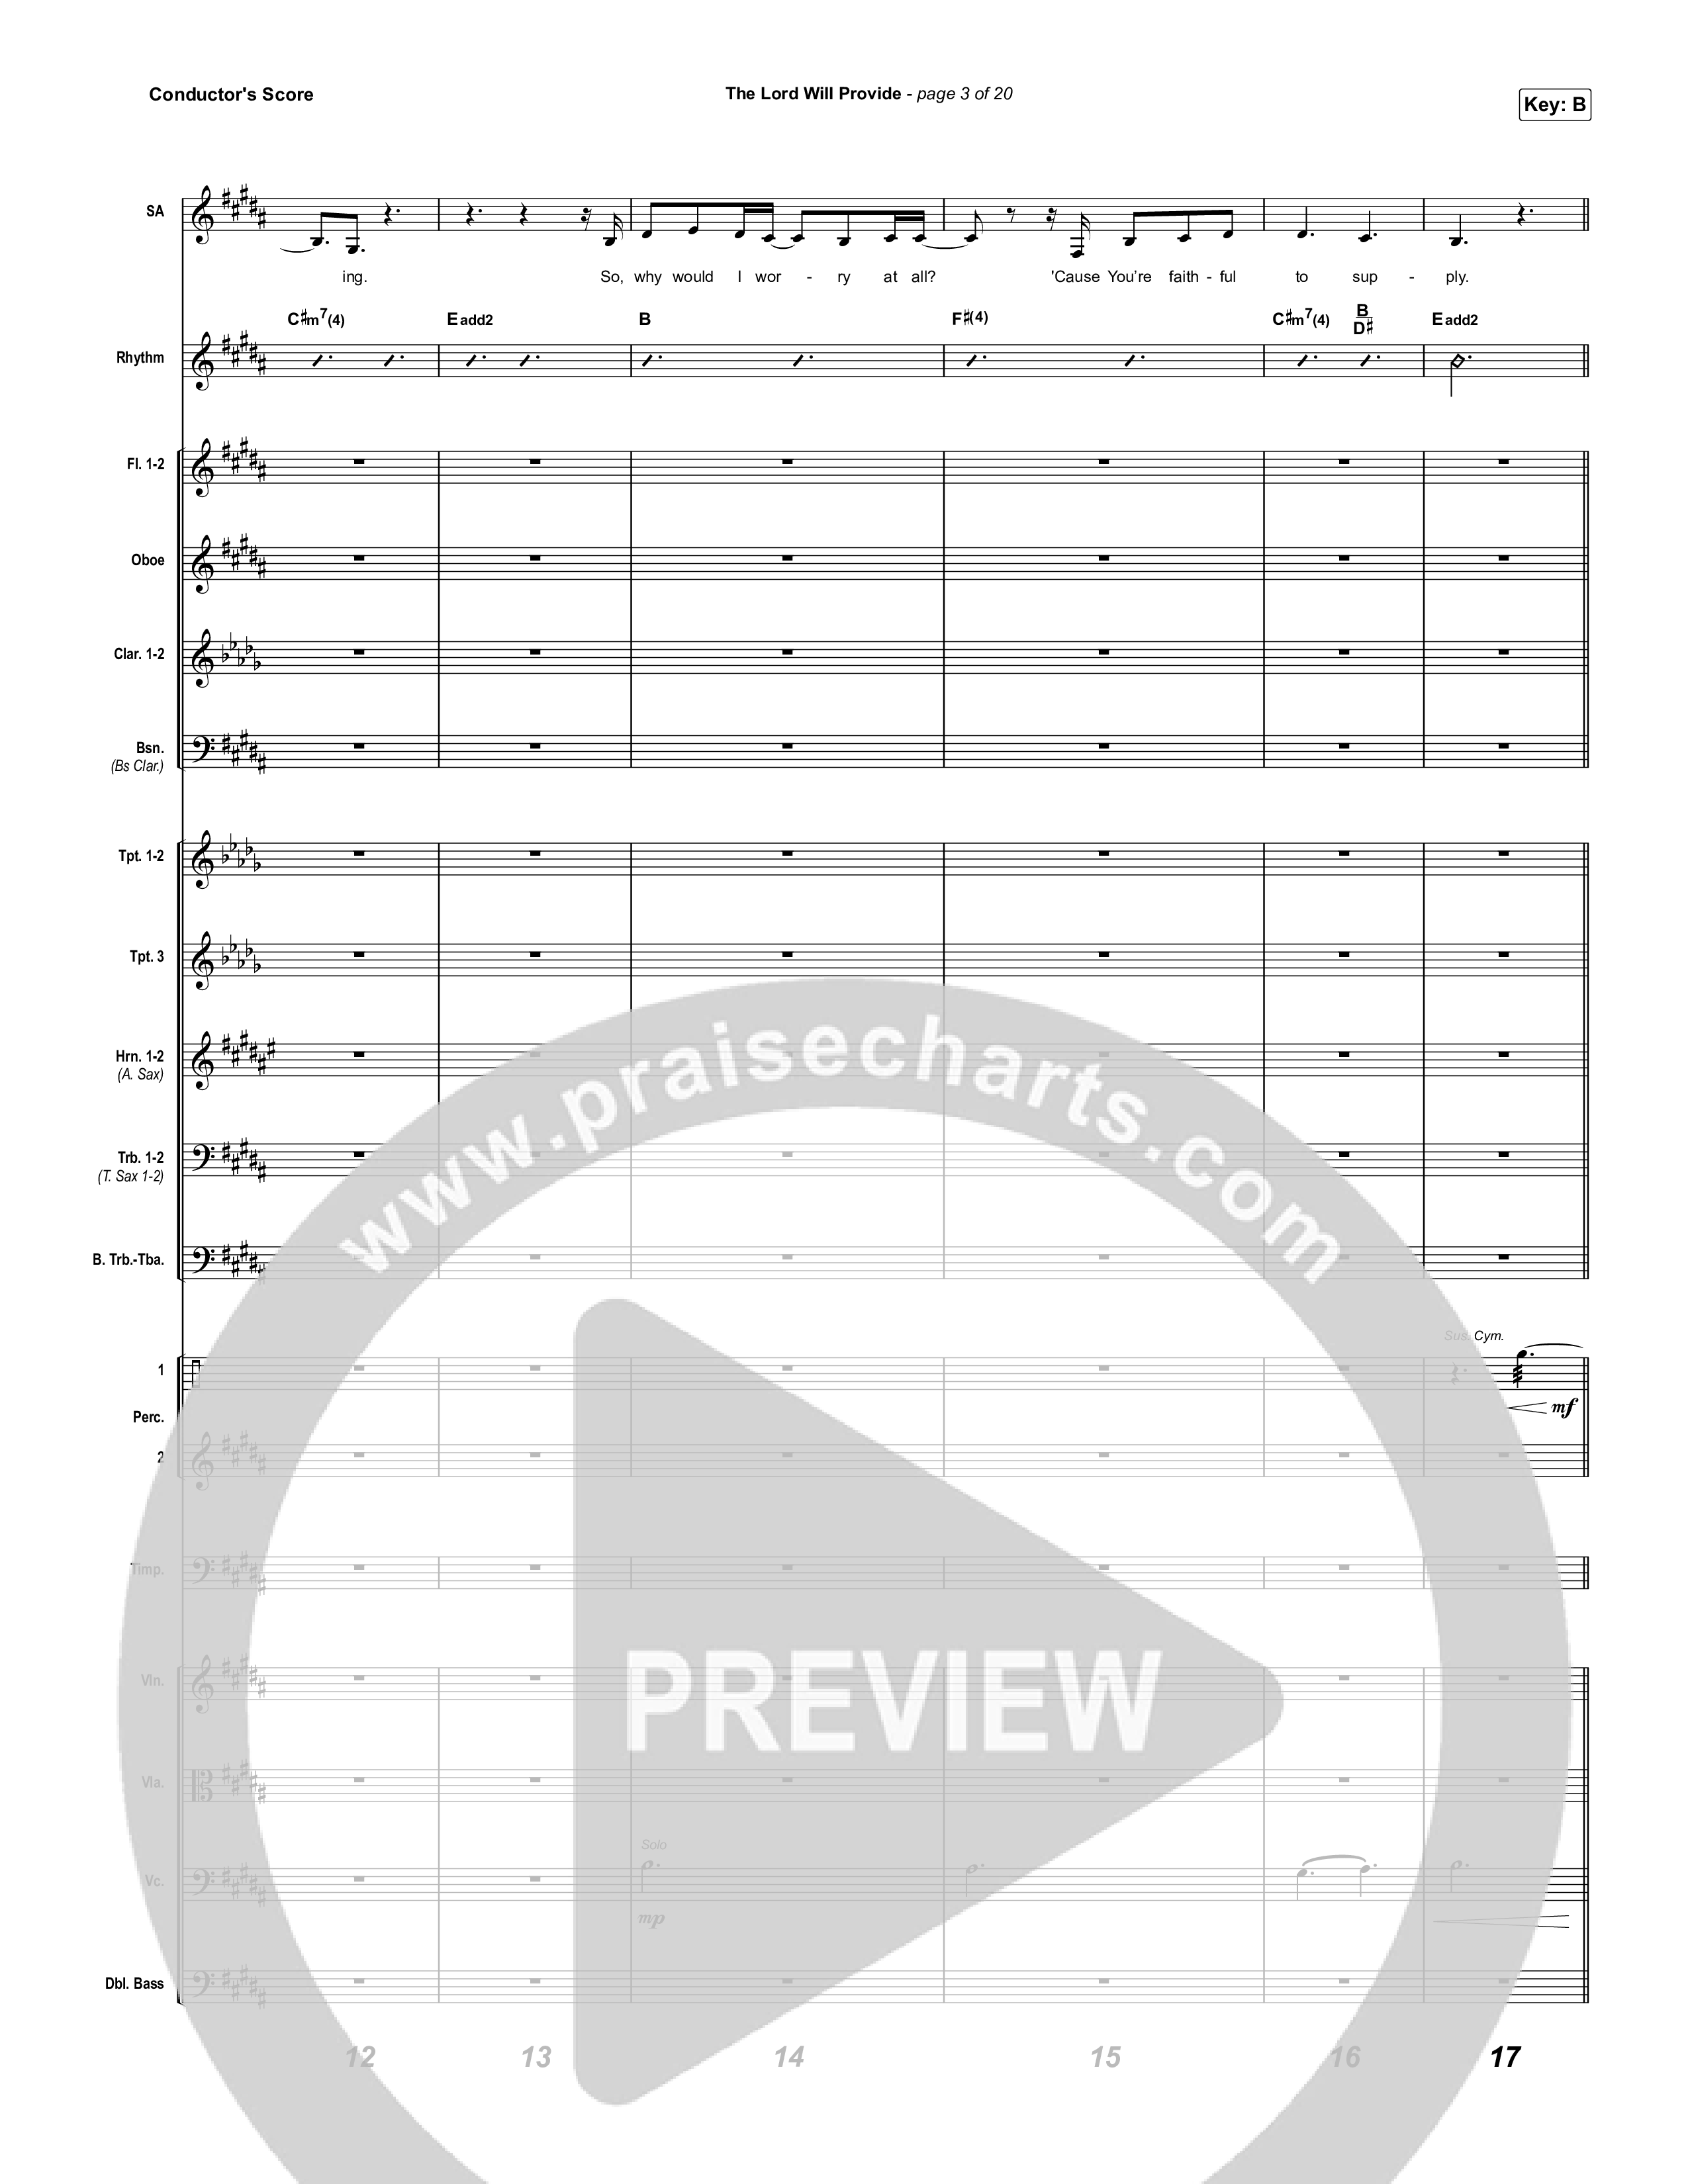 The Lord Will Provide Conductor's Score (Passion / Landon Wolfe)